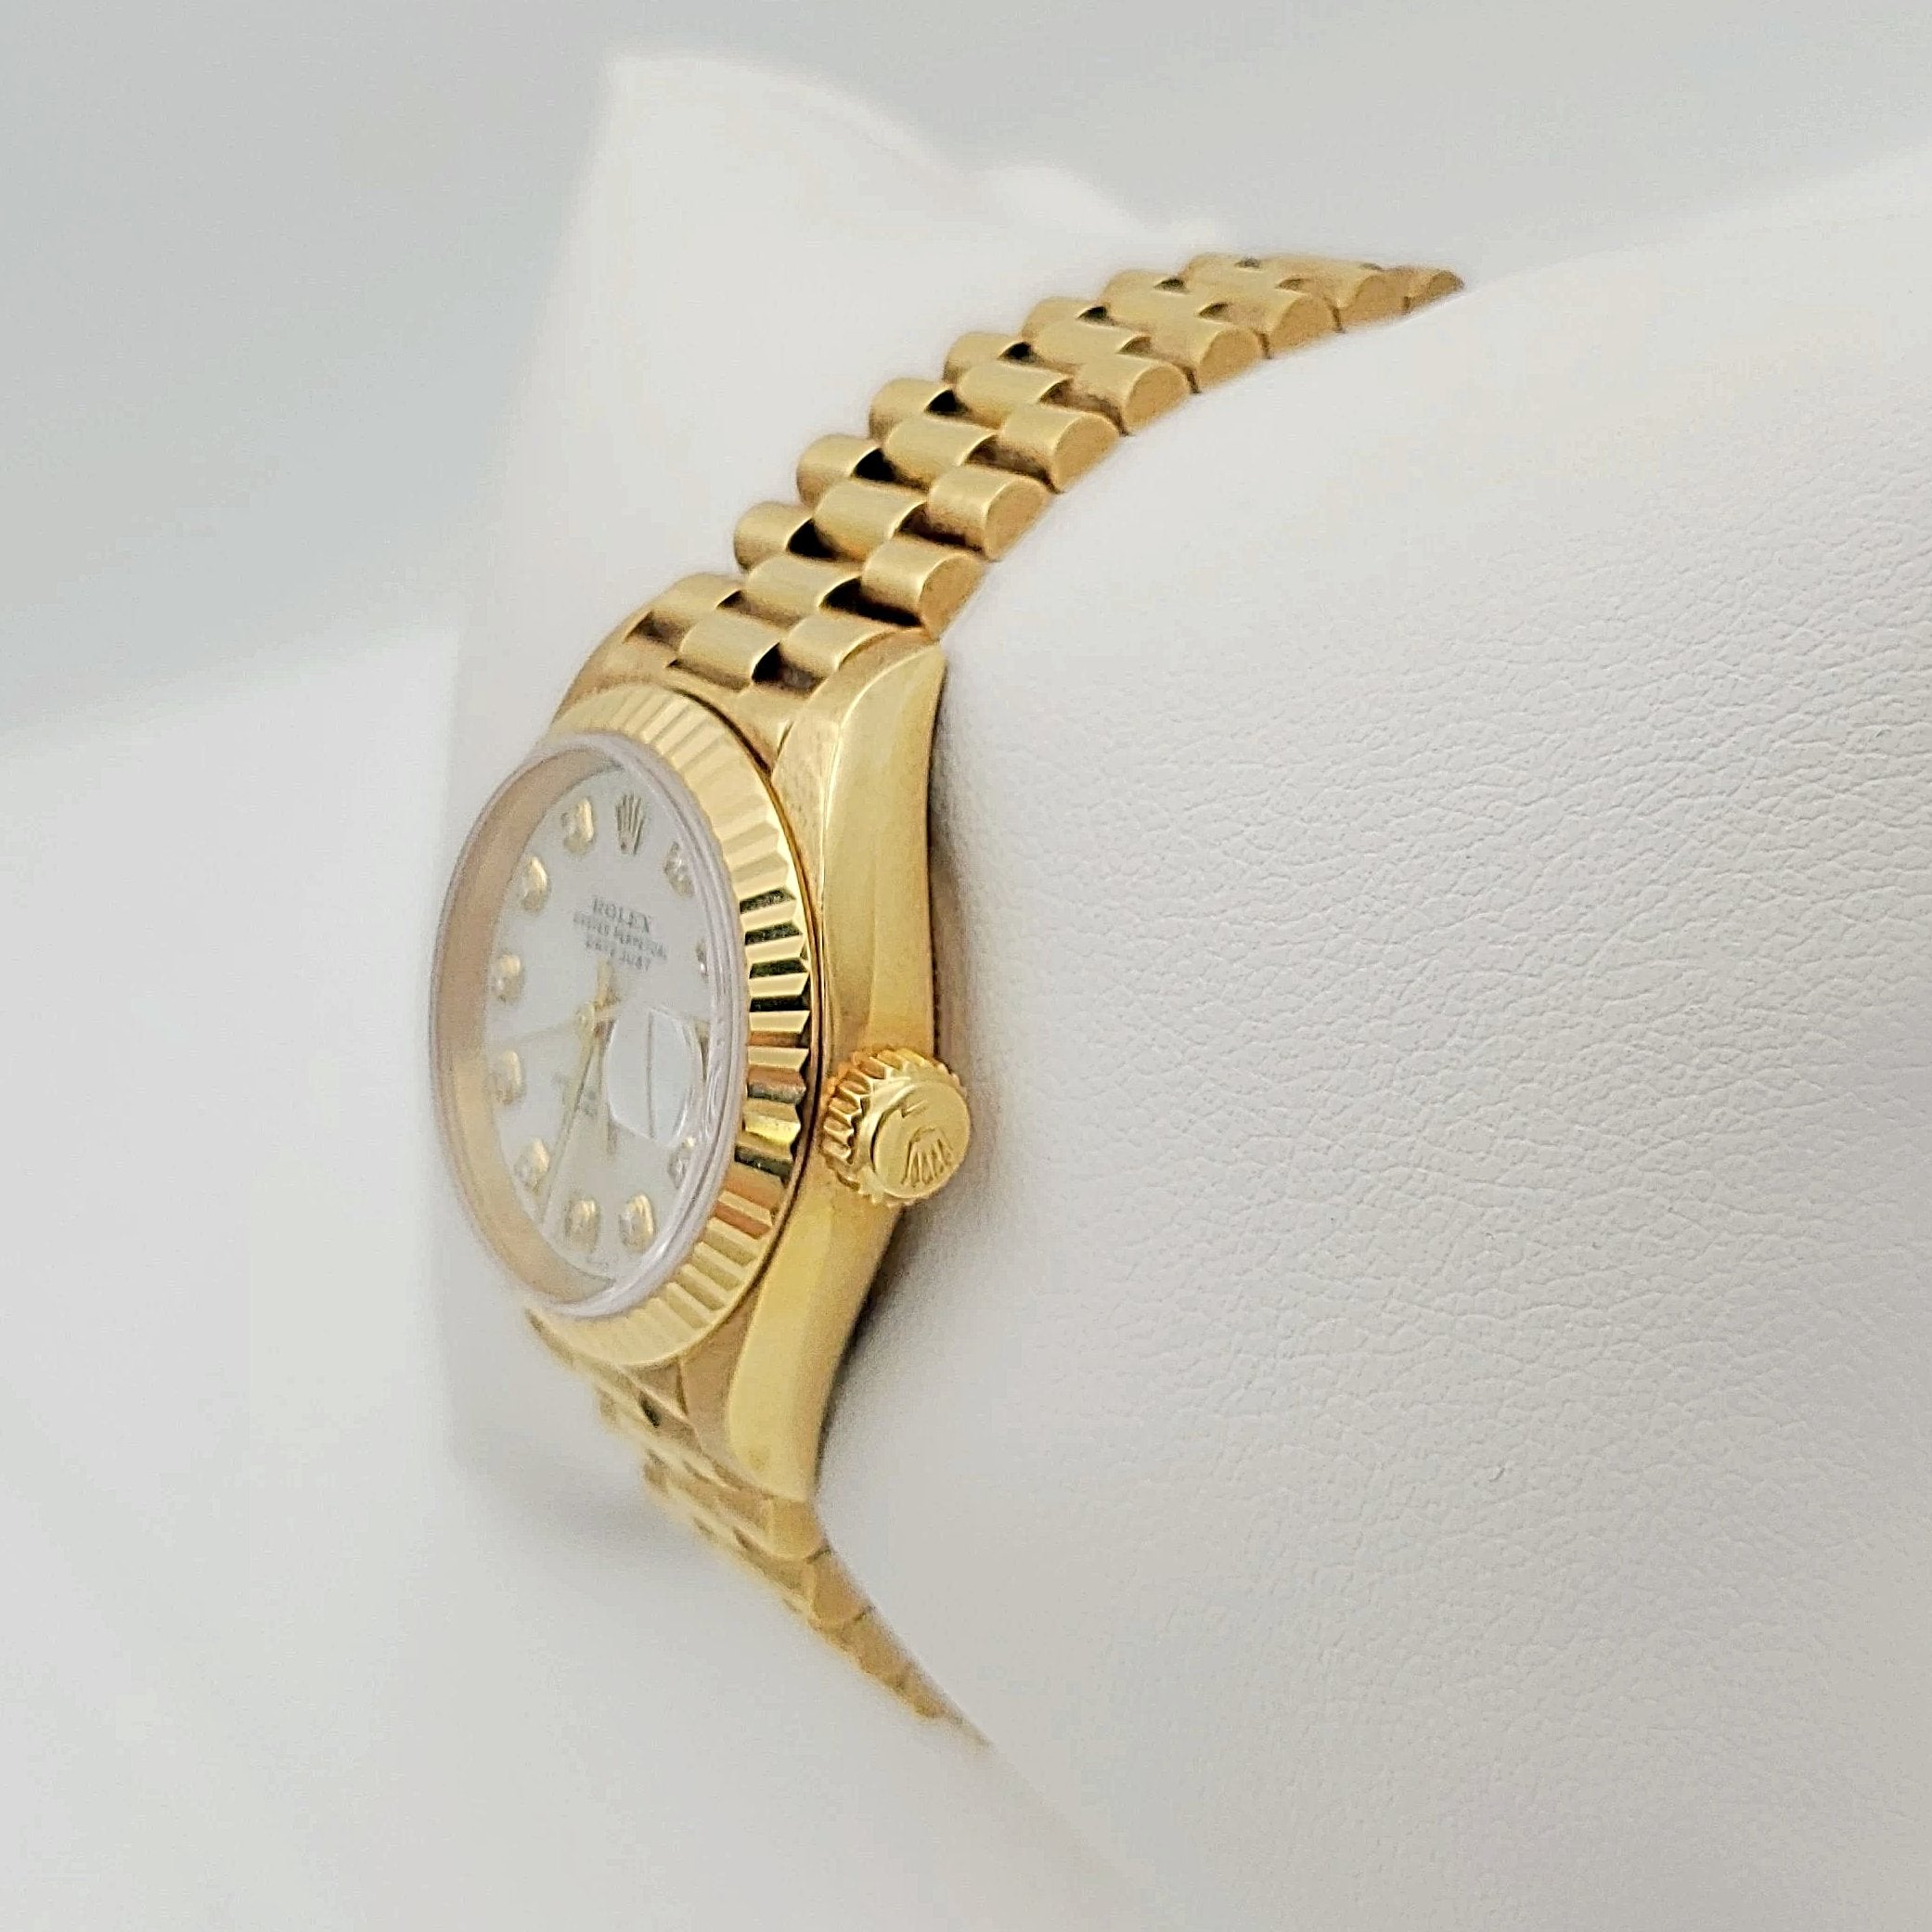 Women's Rolex 26mm Presidential 18K Solid Yellow Gold Watch with Mother of Pearl Diamond Dial and Fluted Bezel. (Pre-Owned)